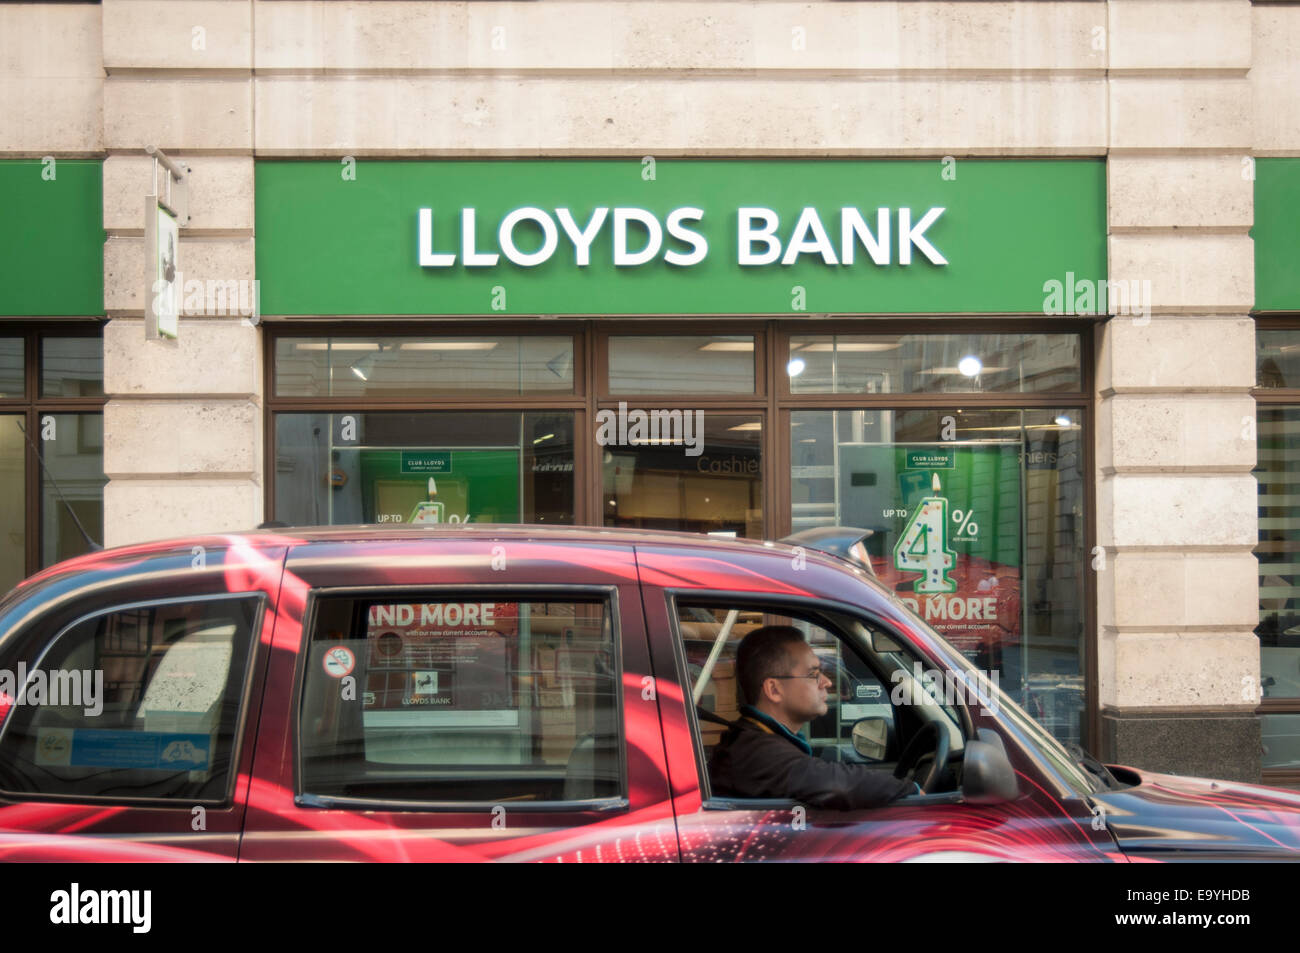 A branch of Lloyds Bank in London Stock Photo